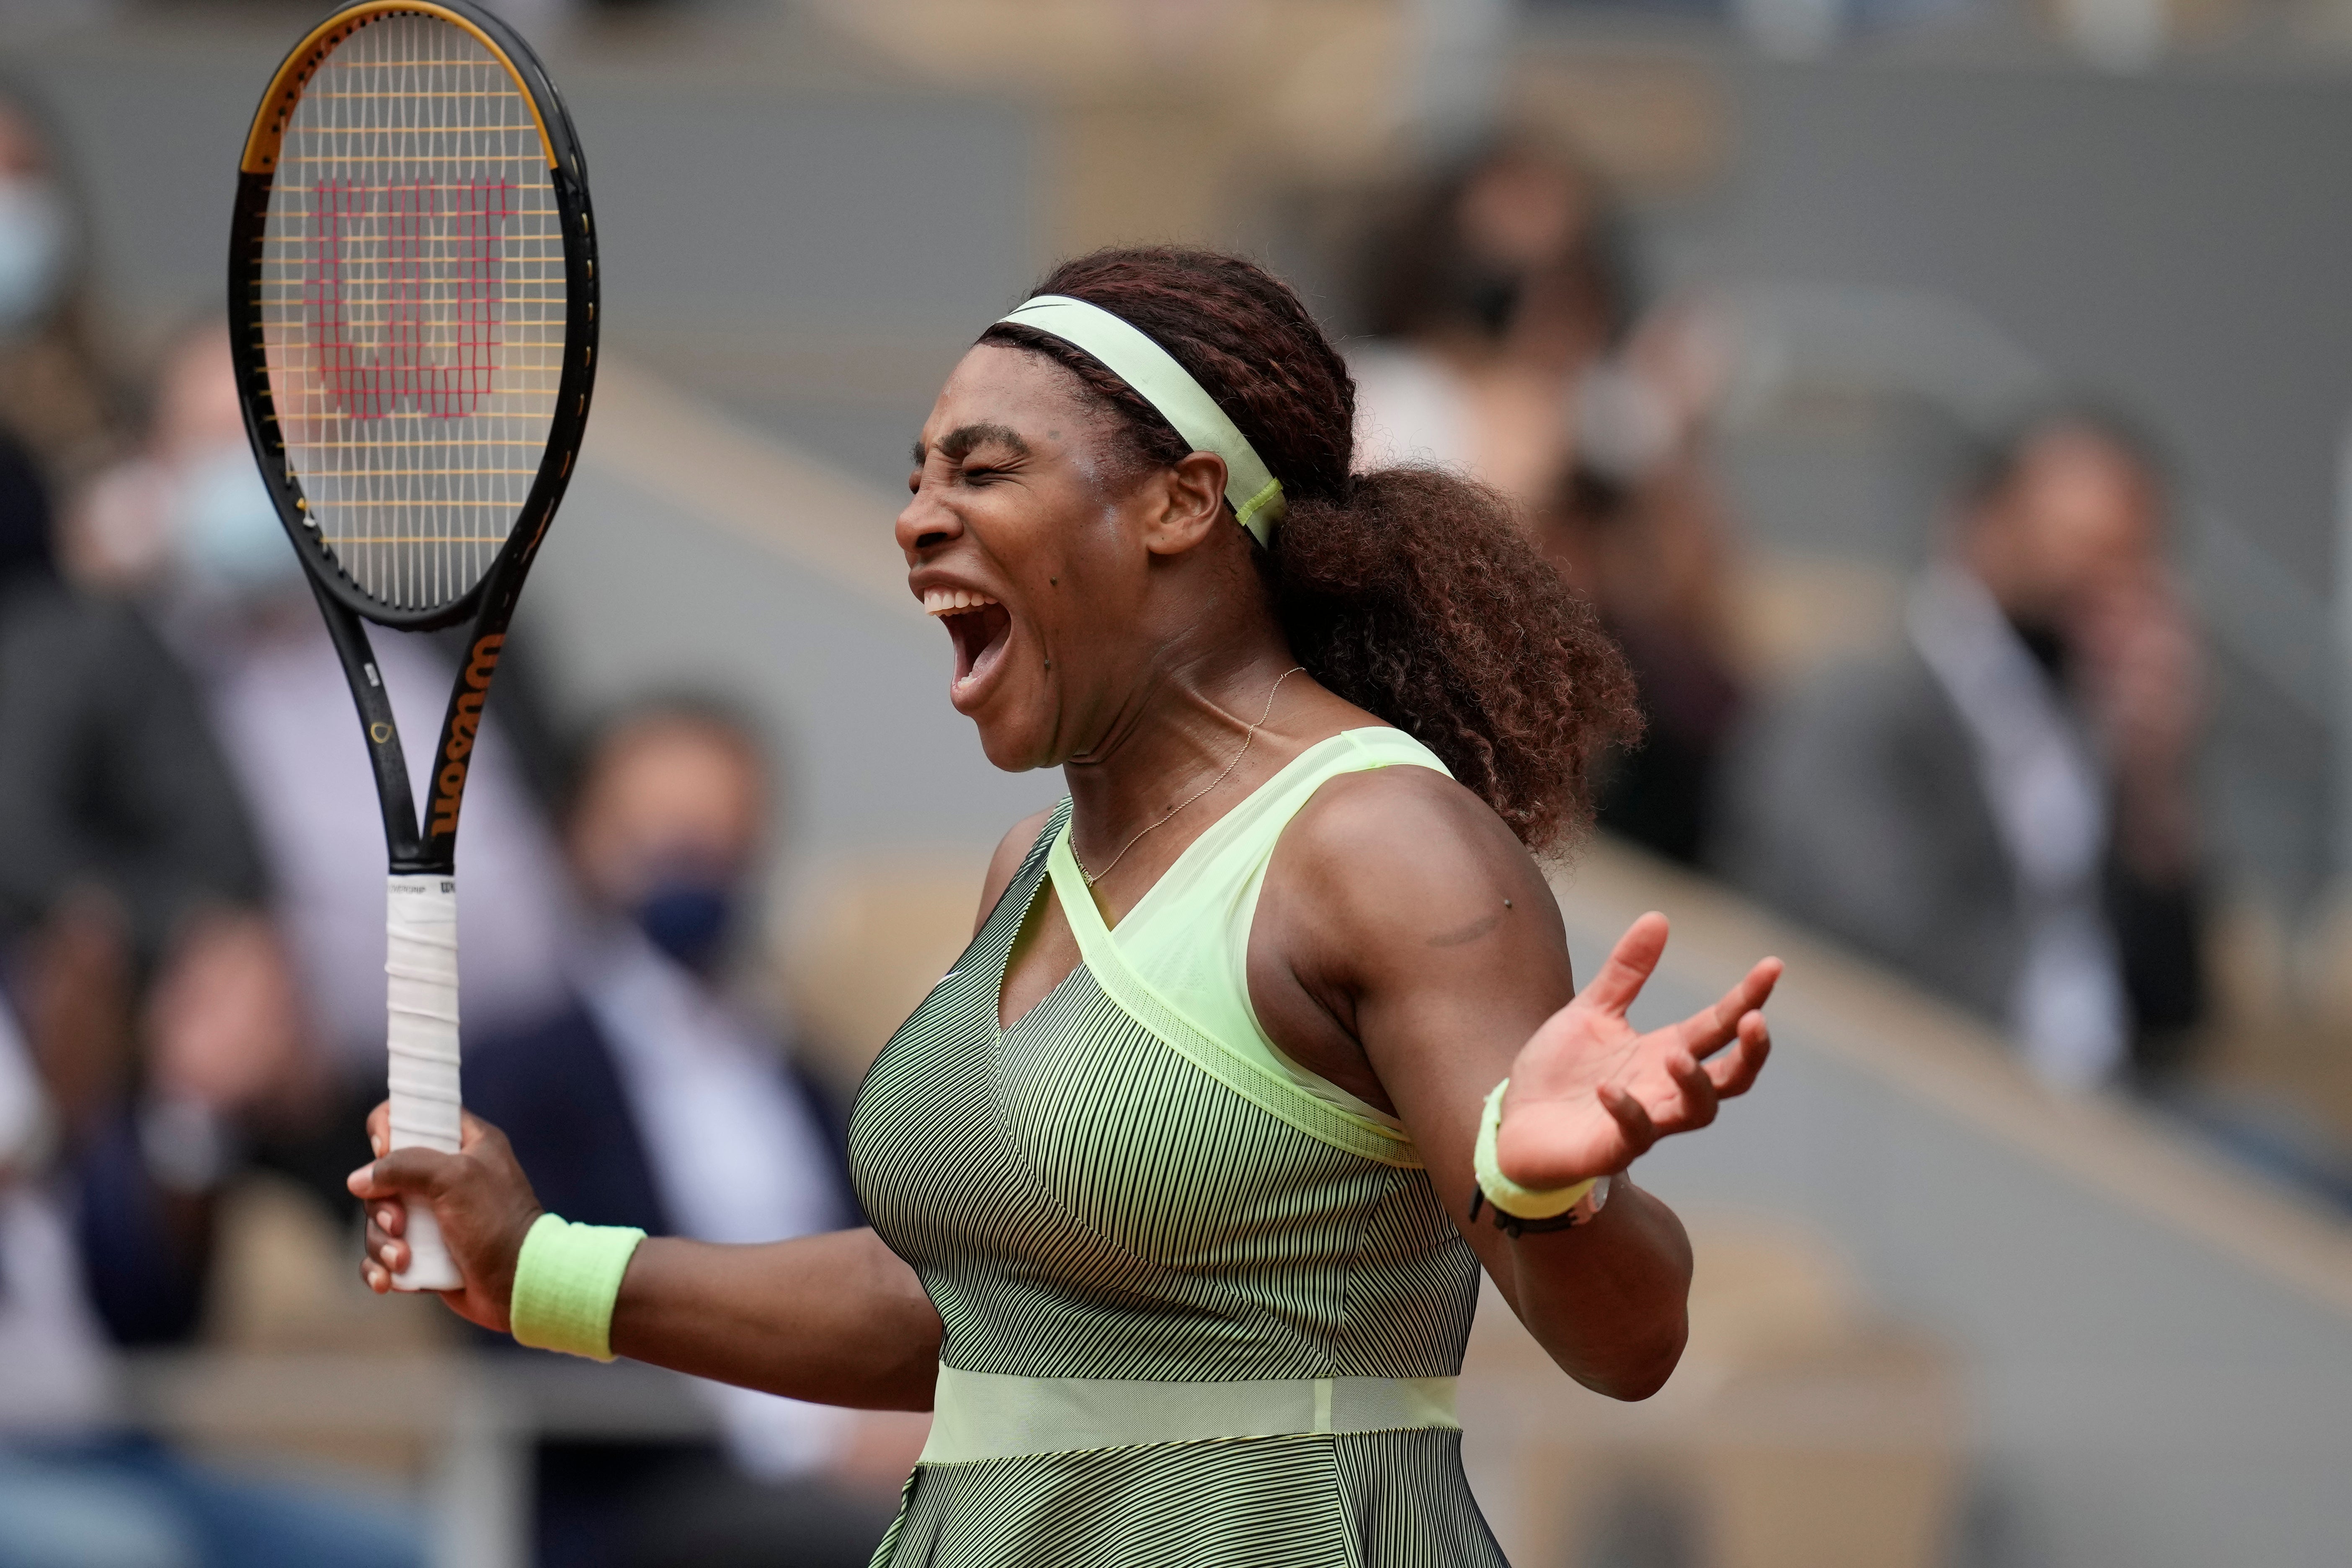 Serena Williams overcame some frustrating moments in the second half